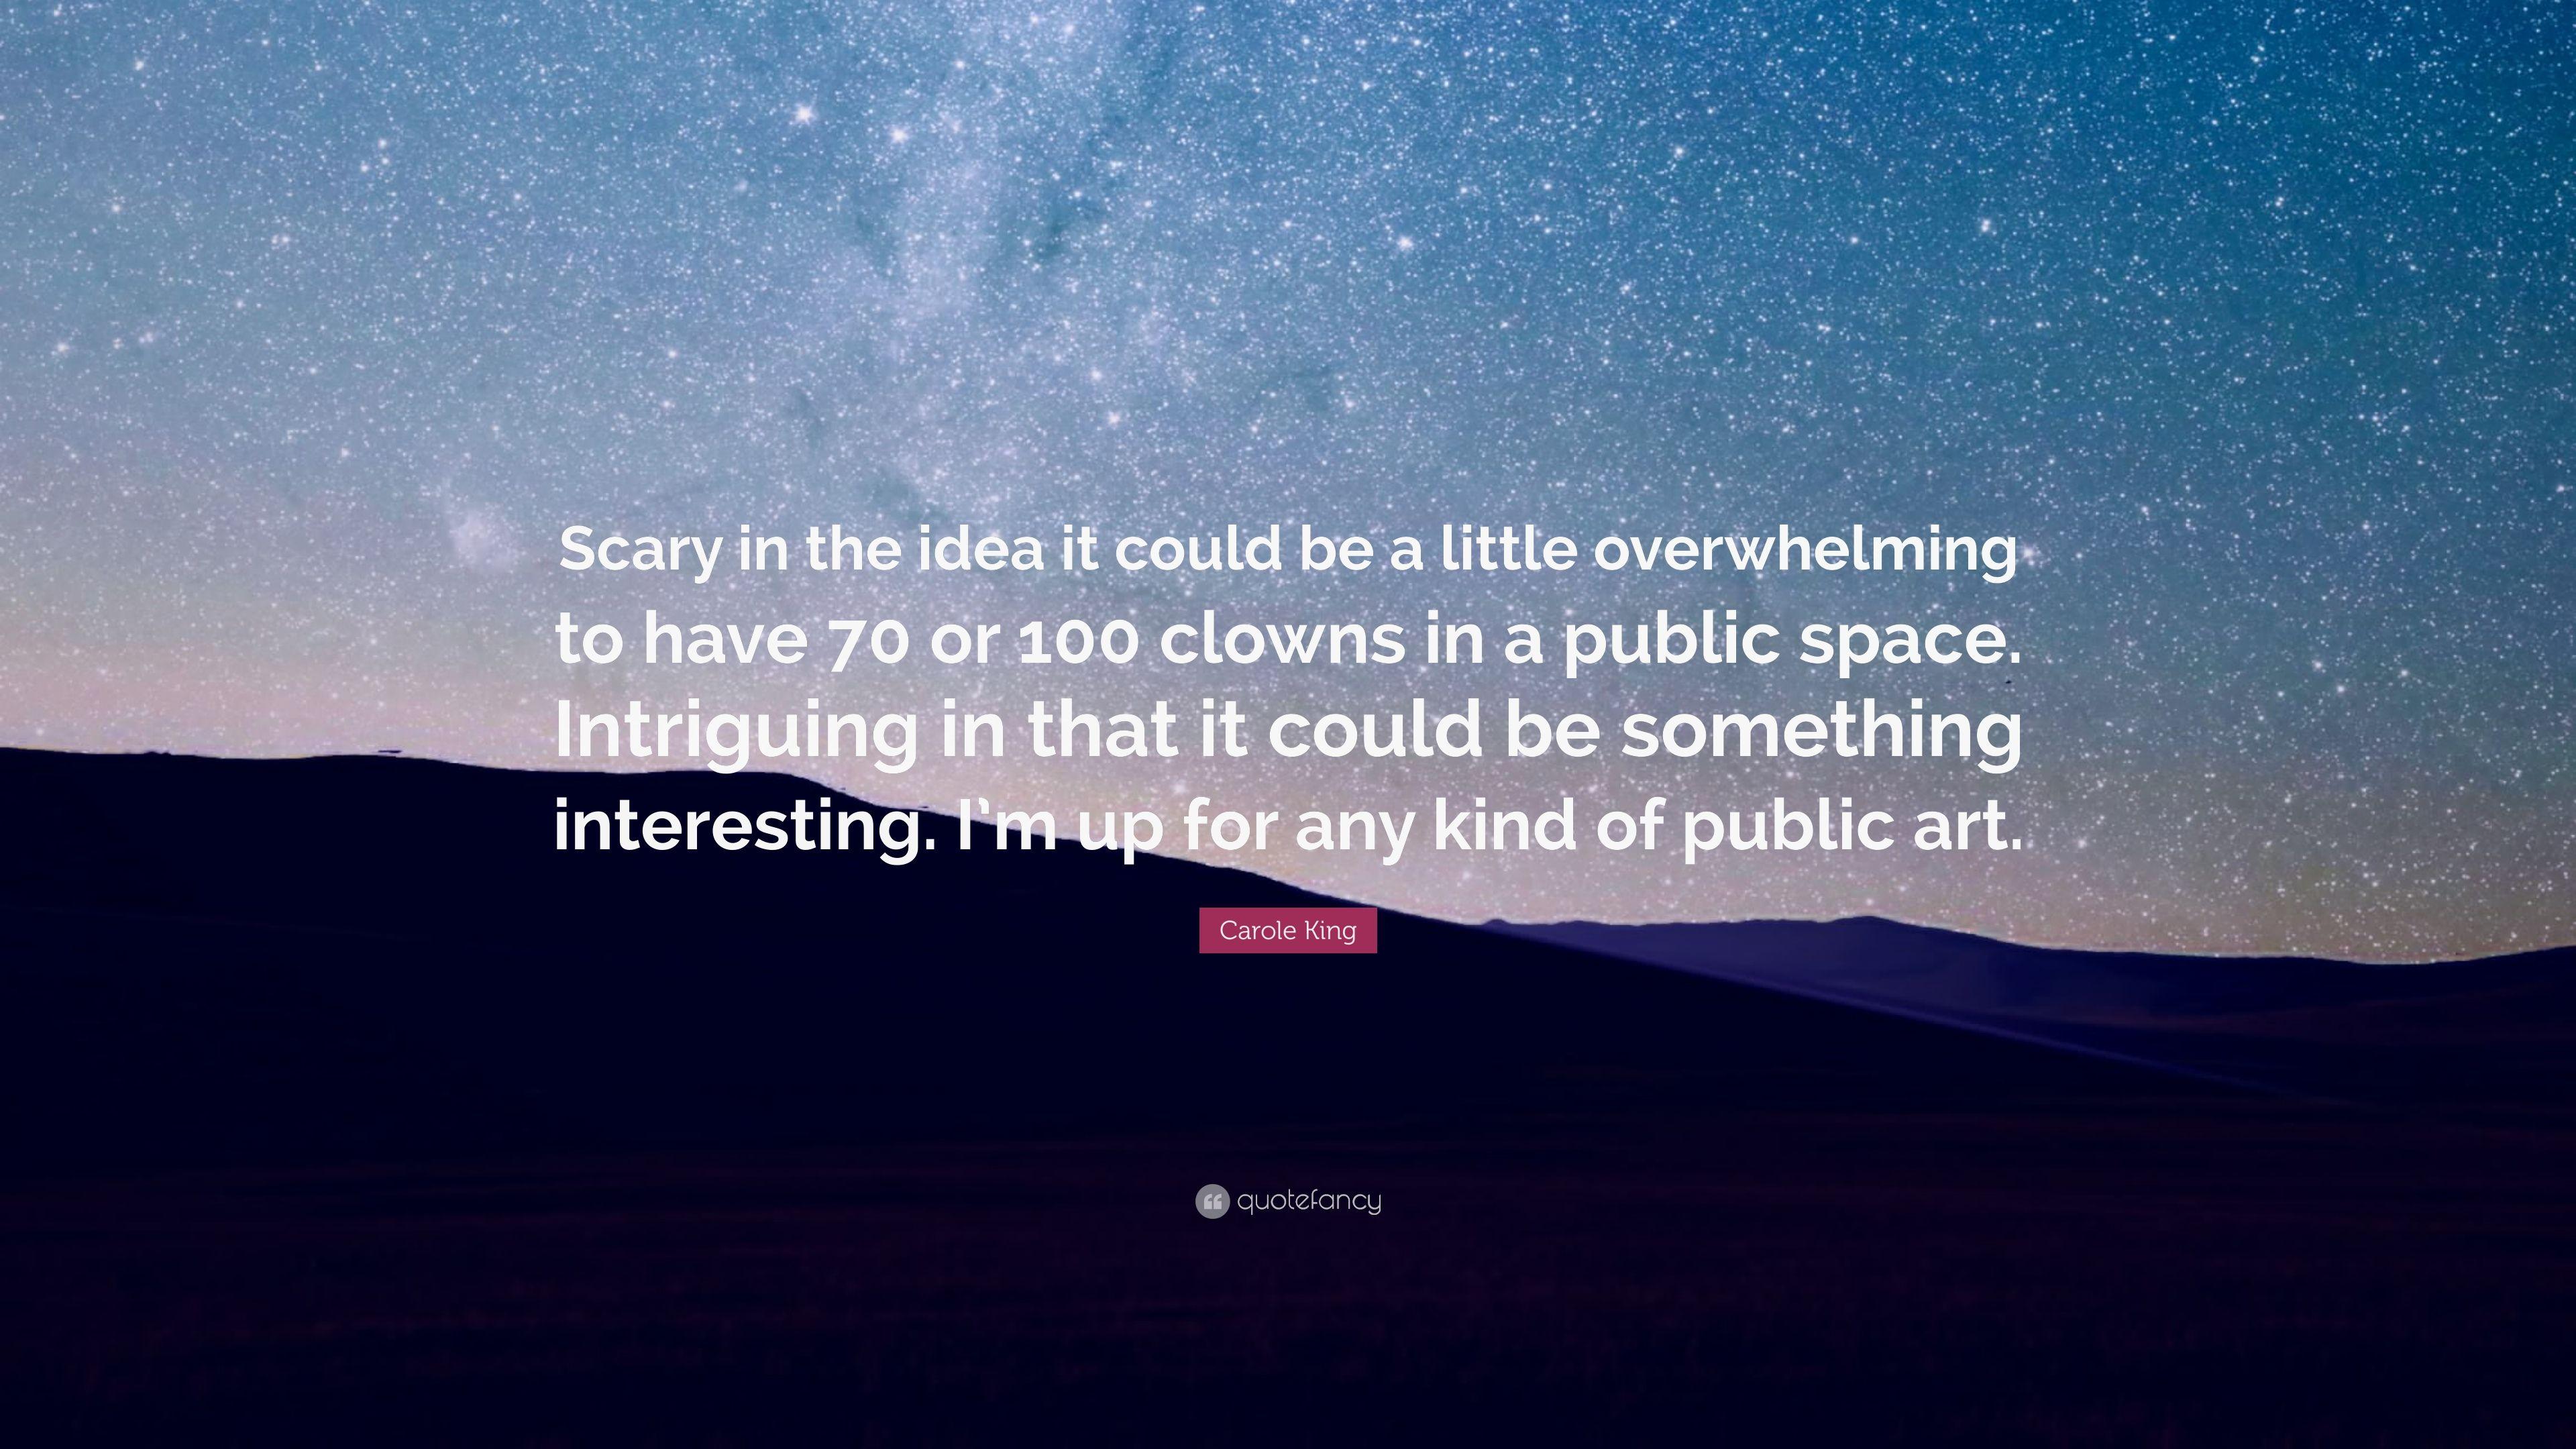 Carole King Quote: “Scary in the idea it could be a little